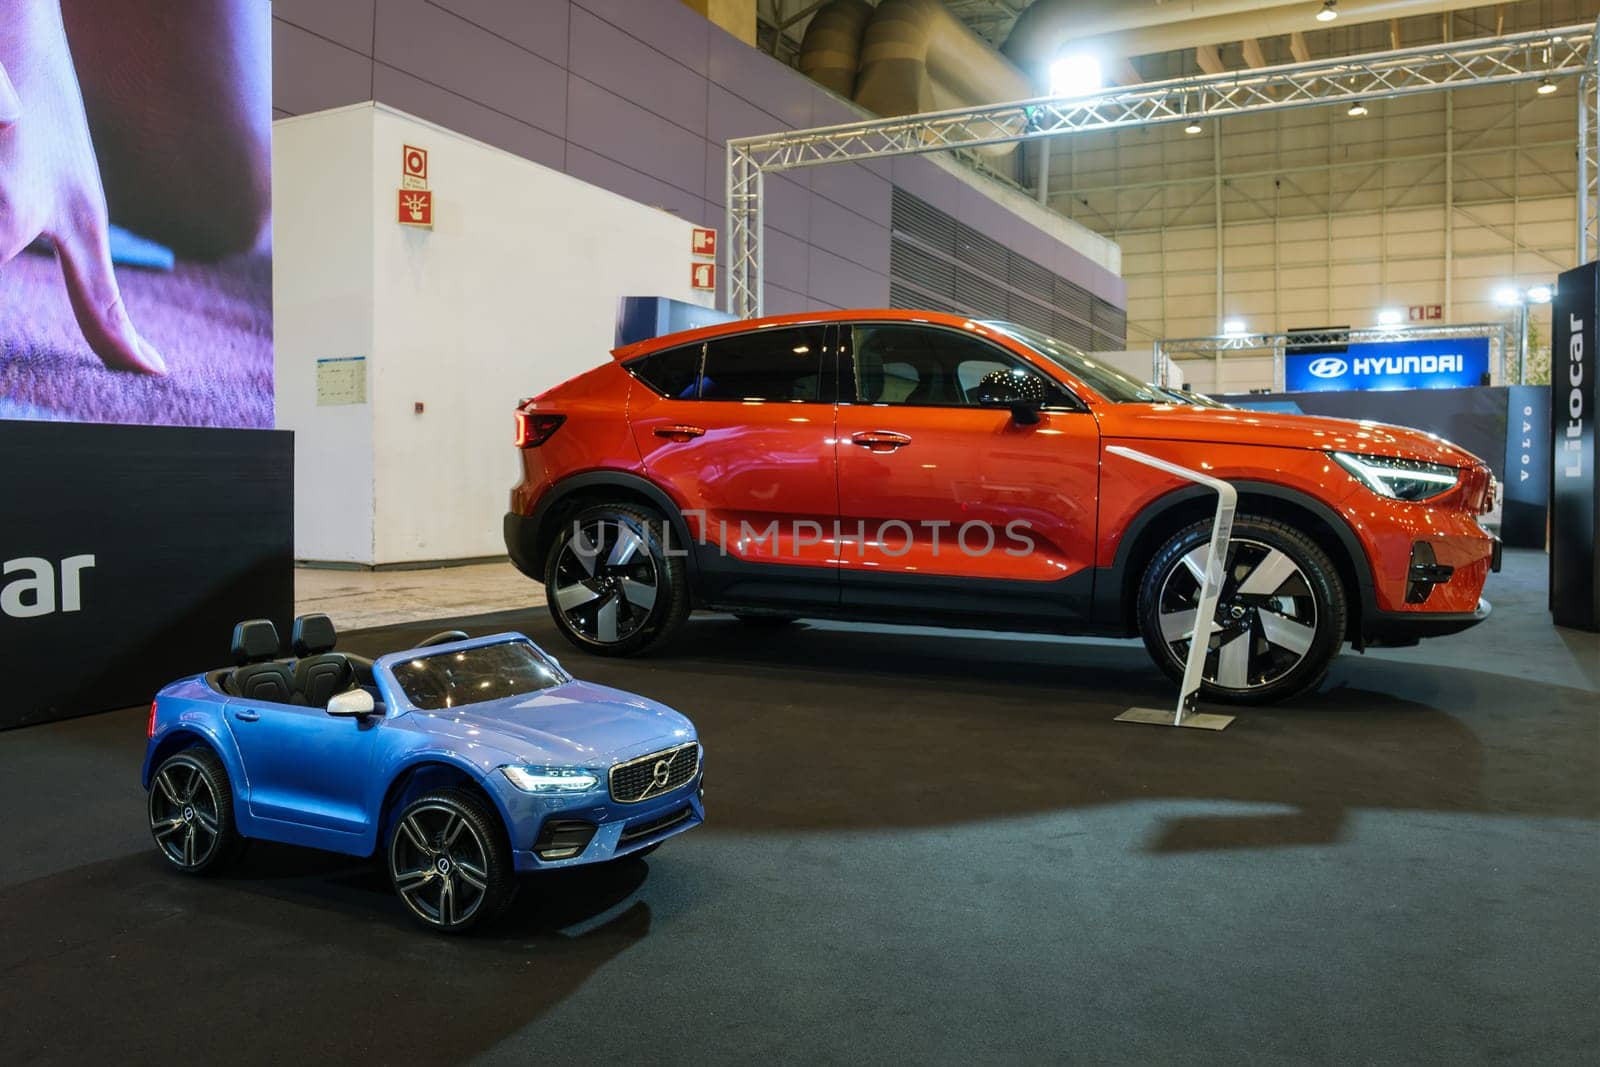 Volvo C40 Recharge electric car at ECAR SHOW - Hybrid and Electric Motor Show by dimol